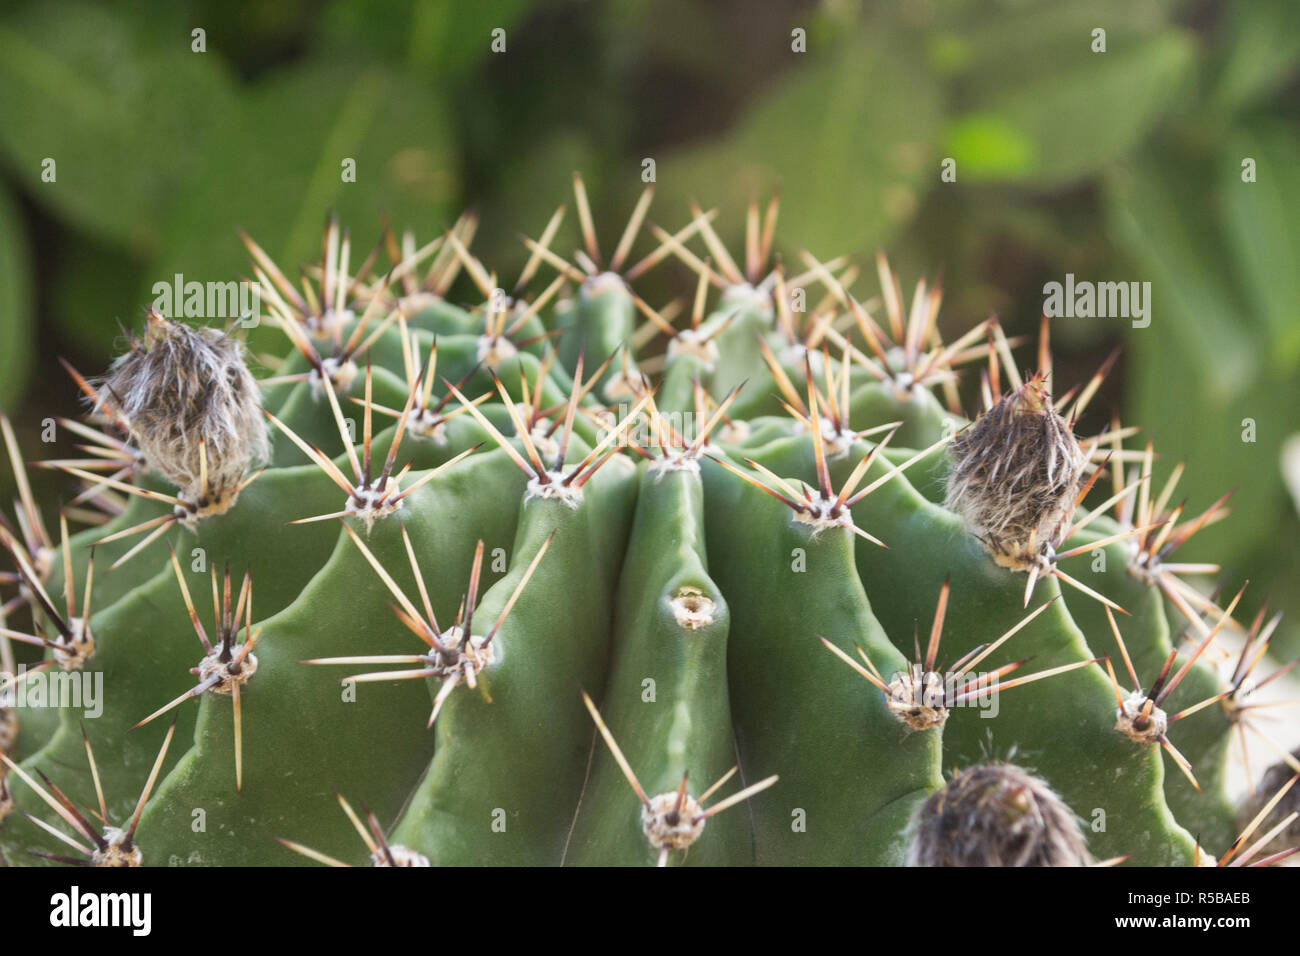 hostile protective beauty, outdoor cactus Stock Photo